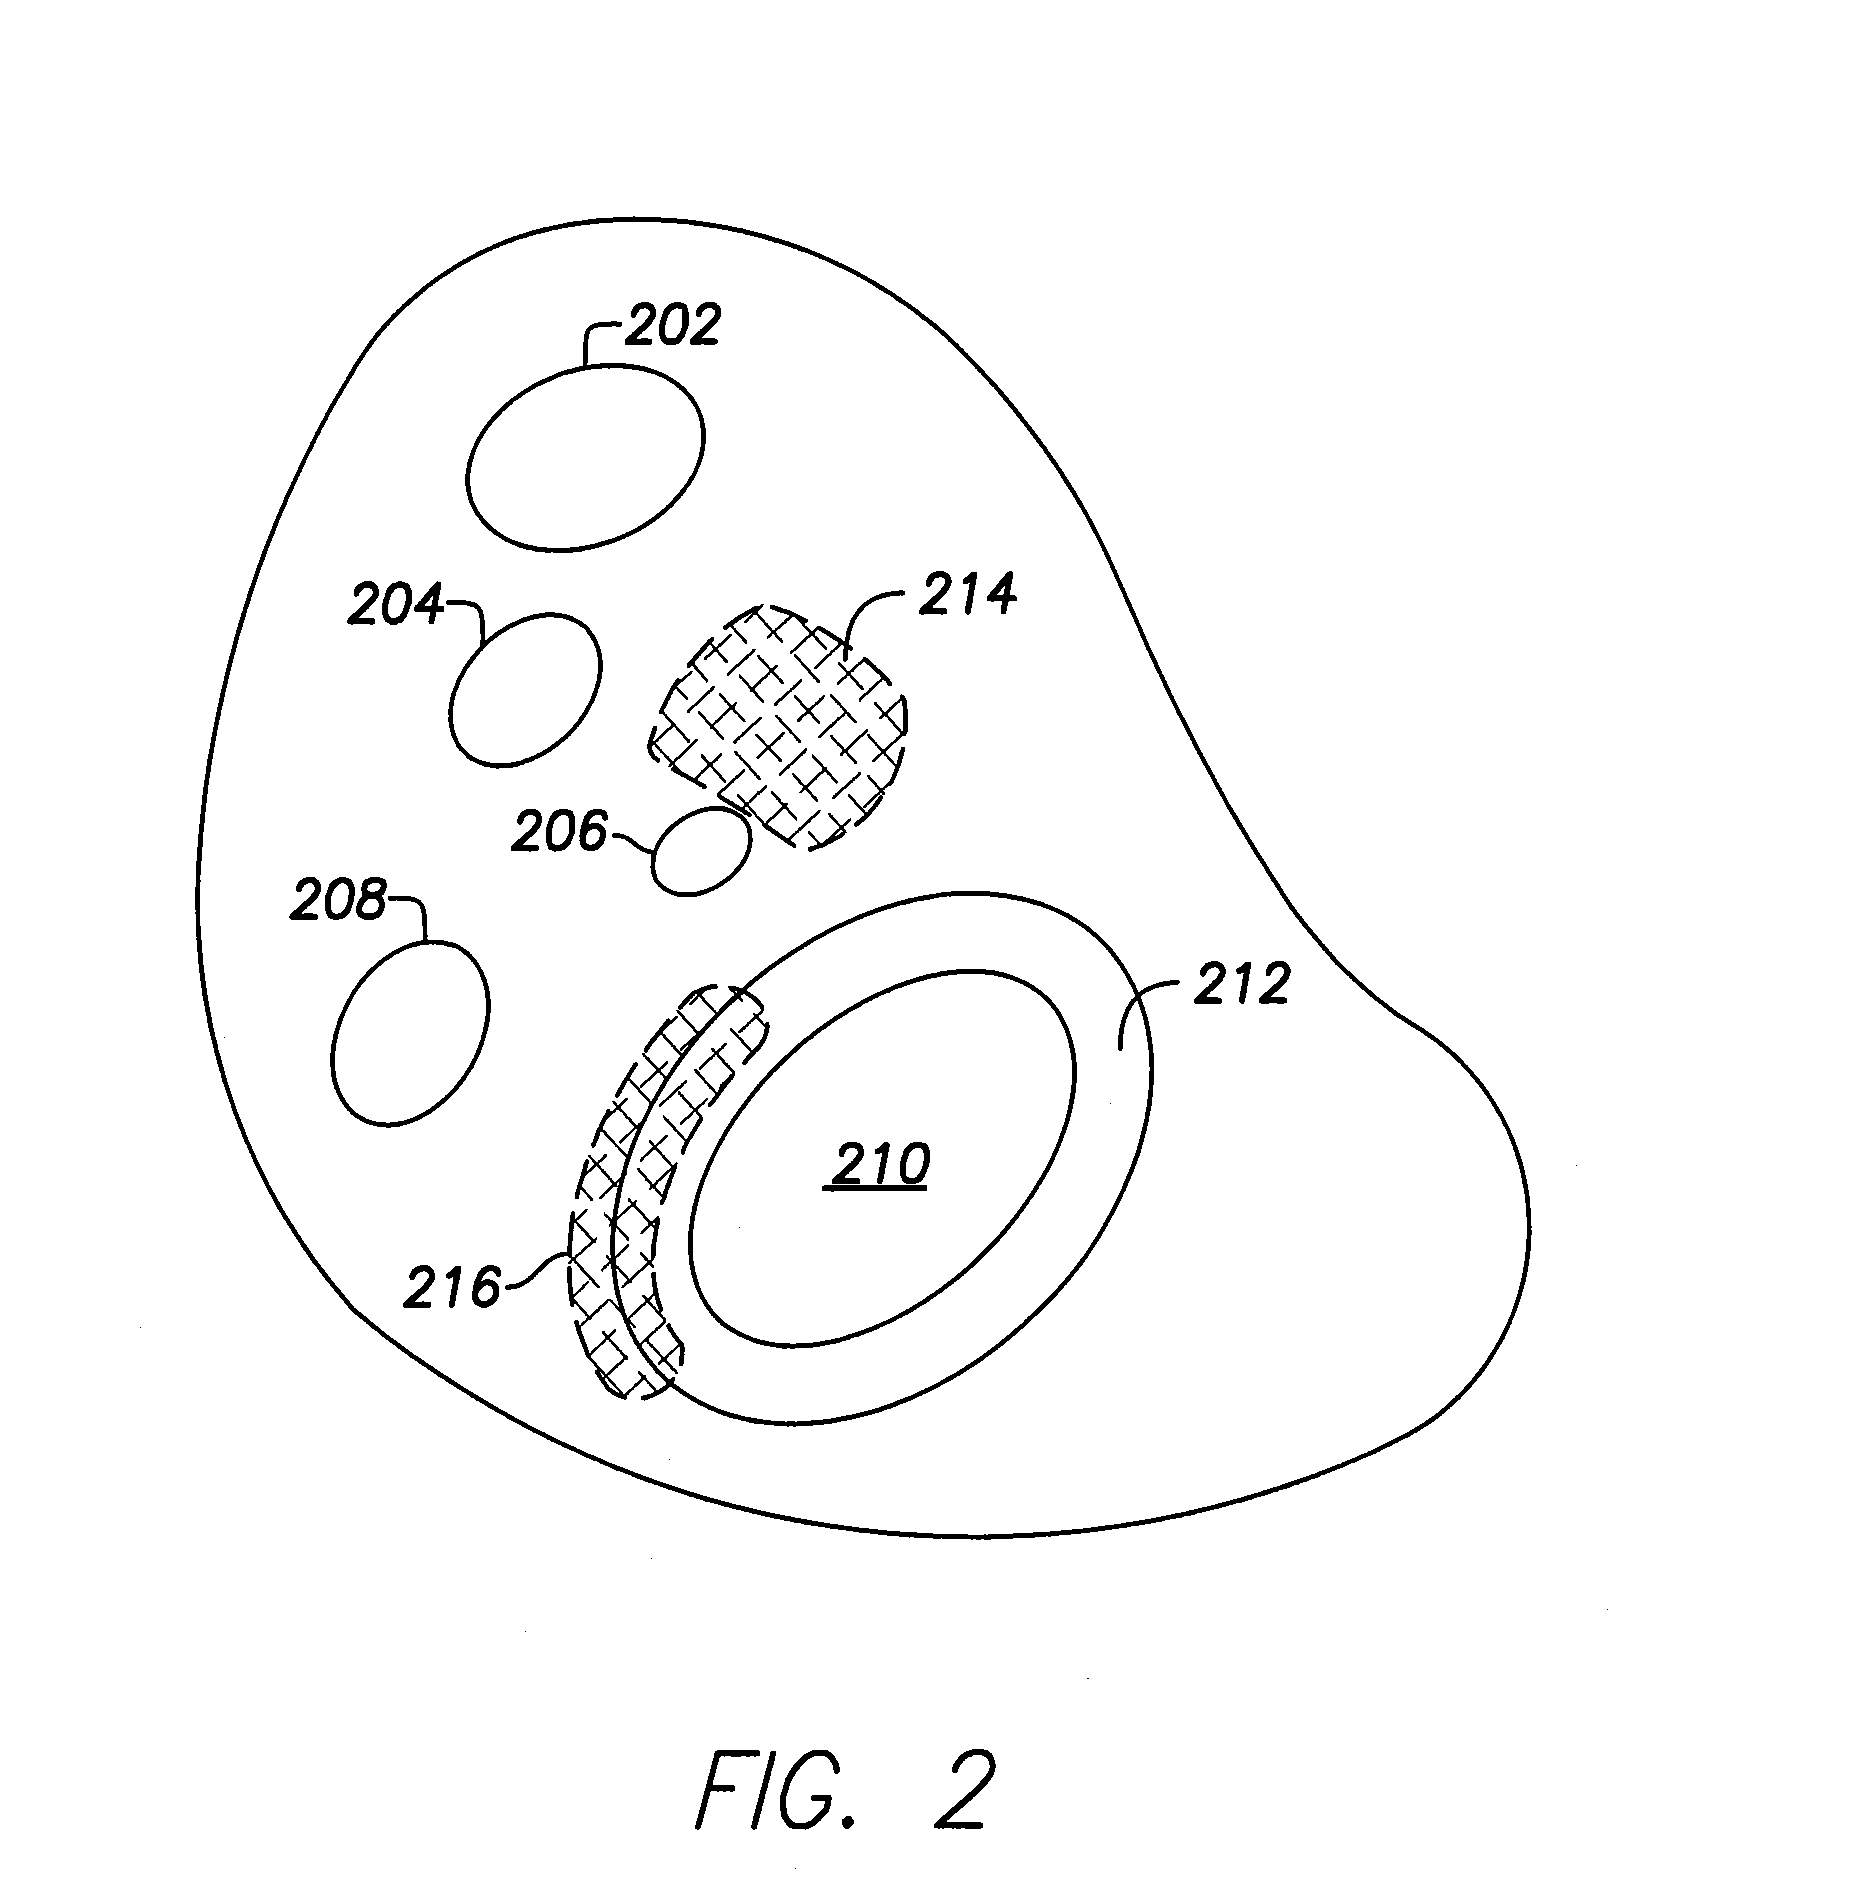 Leadless implantable medical device with dual chamber sensing functionality